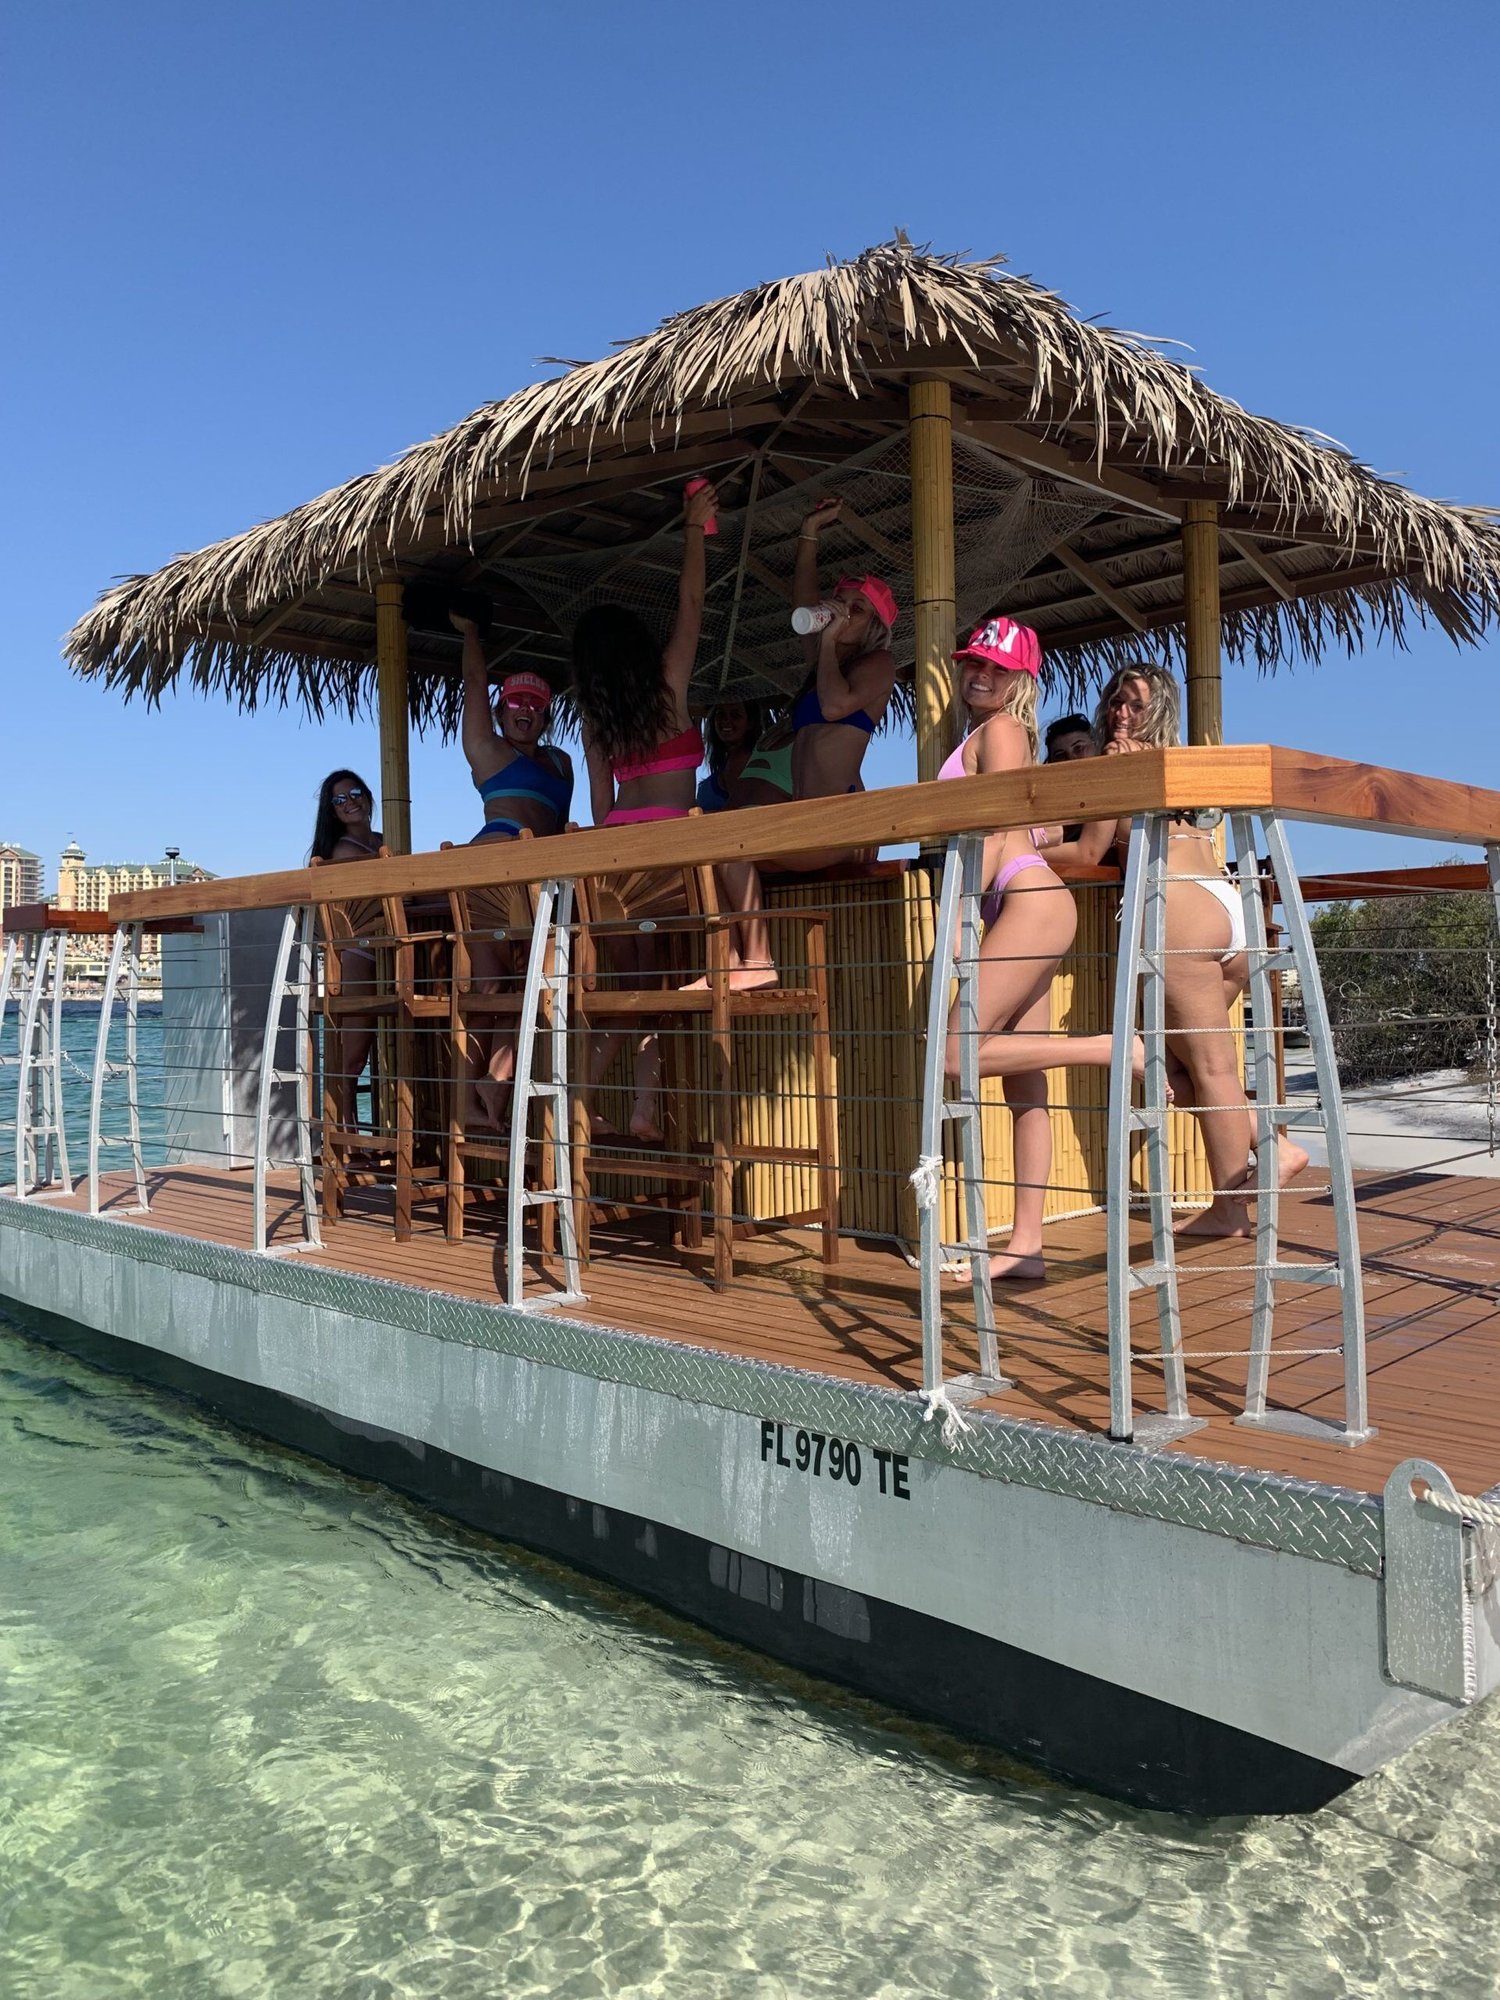 tiki boat in destin florida with girls on a bachelorette